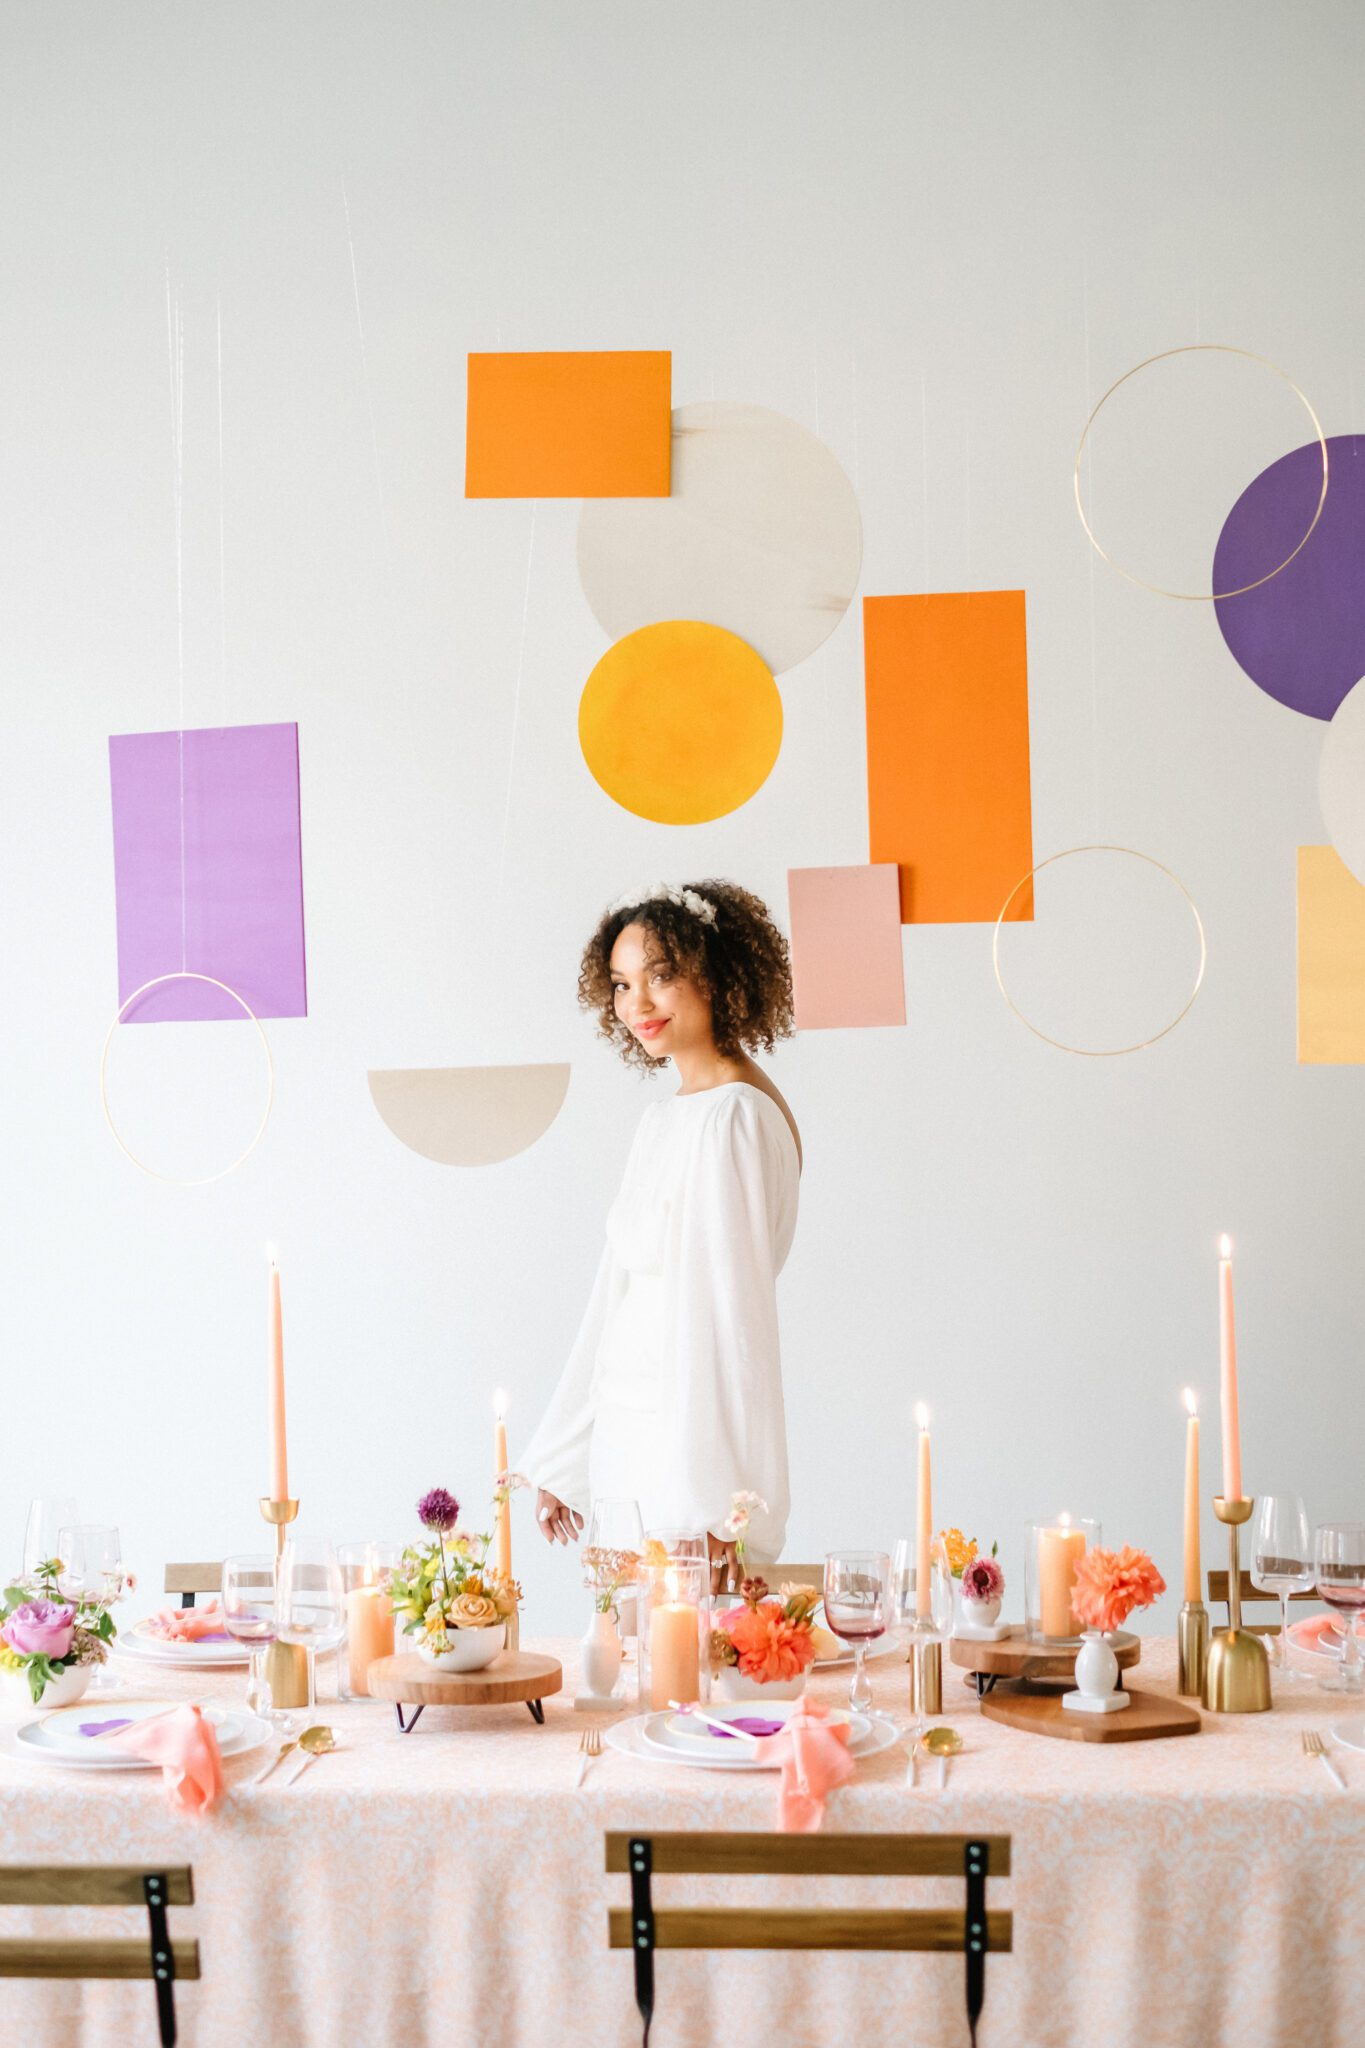 Bright & Colourful Brunch Wedding Inspiration at The Brownstone Calgary, Bronte Bride. Retro inspired vibrant colour palette of purple, orange, yellow, peach, tangerine and coral. Geometric hanging installation over the tables. Bride wearing short bridal gown with long draped sleeves. 